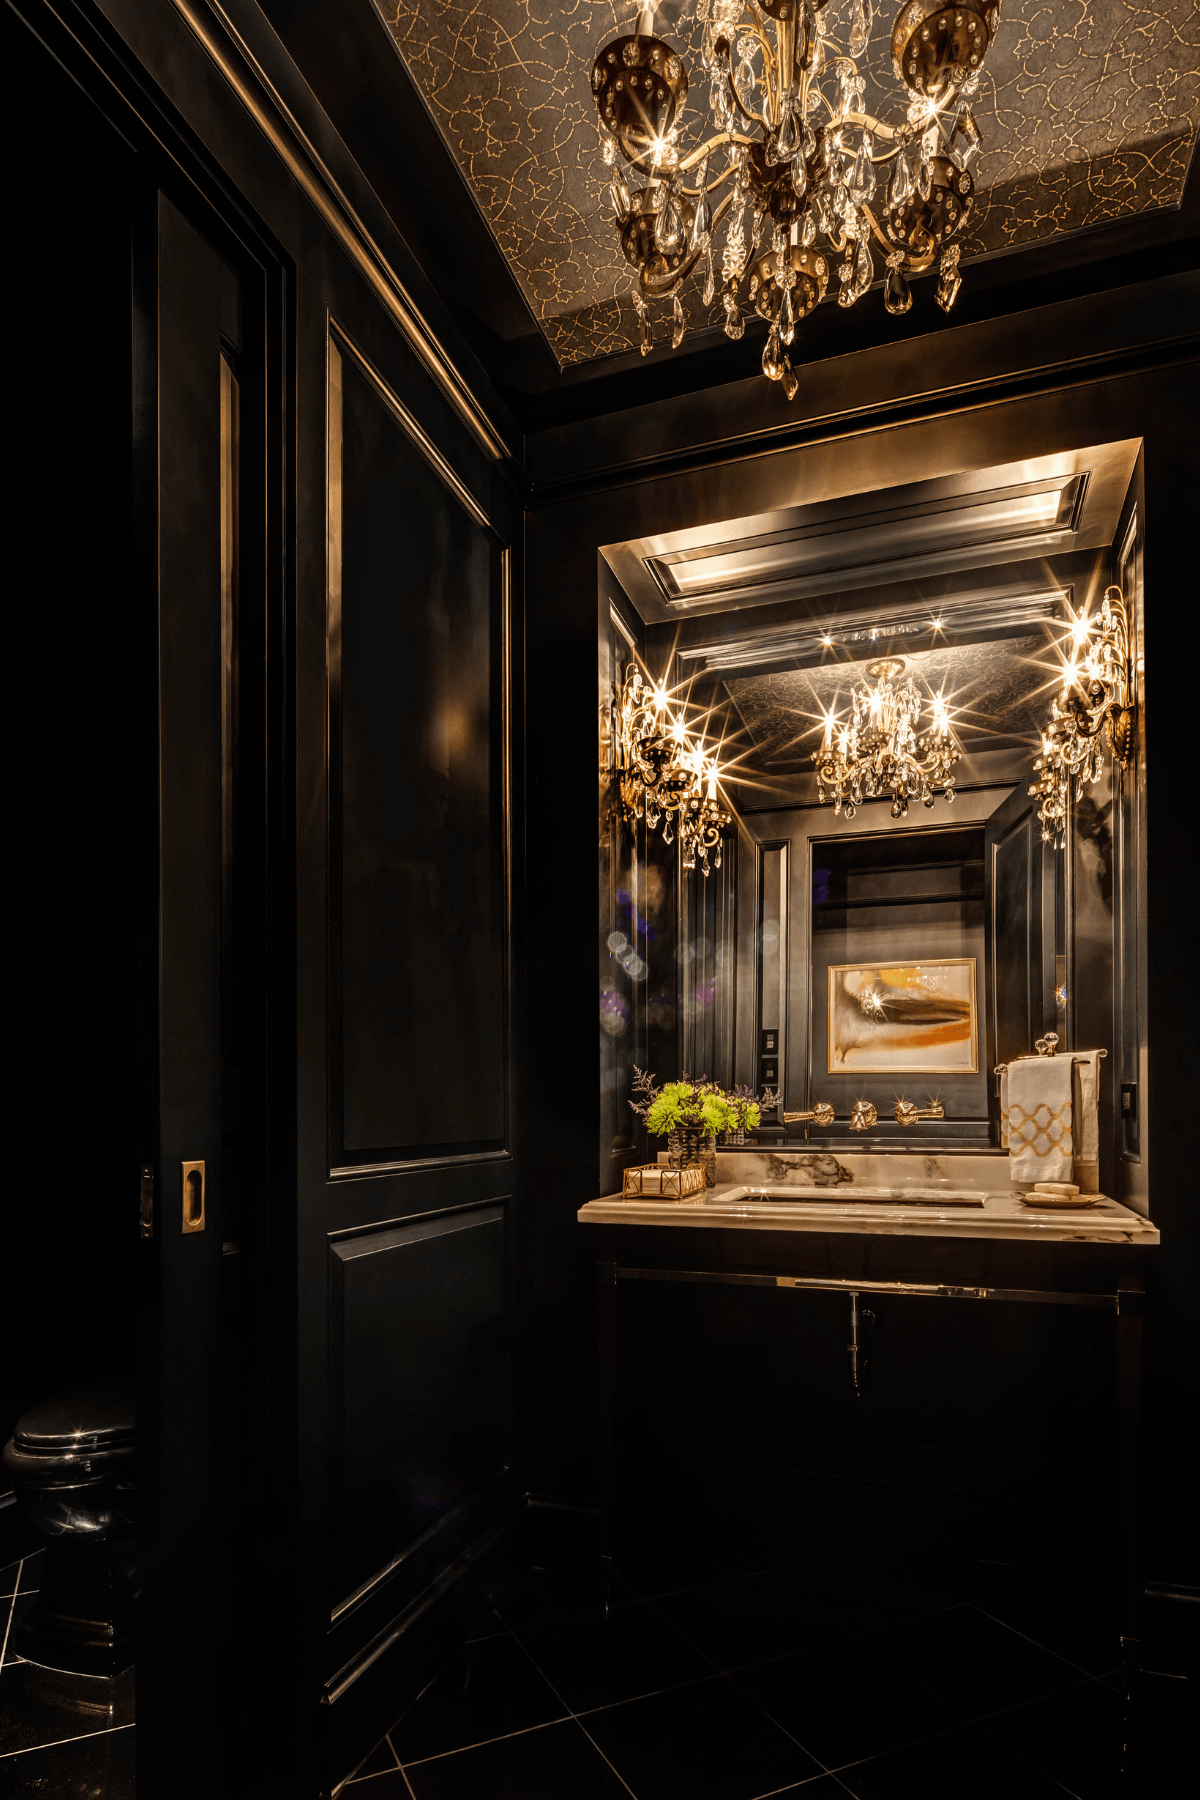 A powder room at the Willowick Residence. Its dark walls, chandelier, and customized ceiling call for an elegant ambiance.